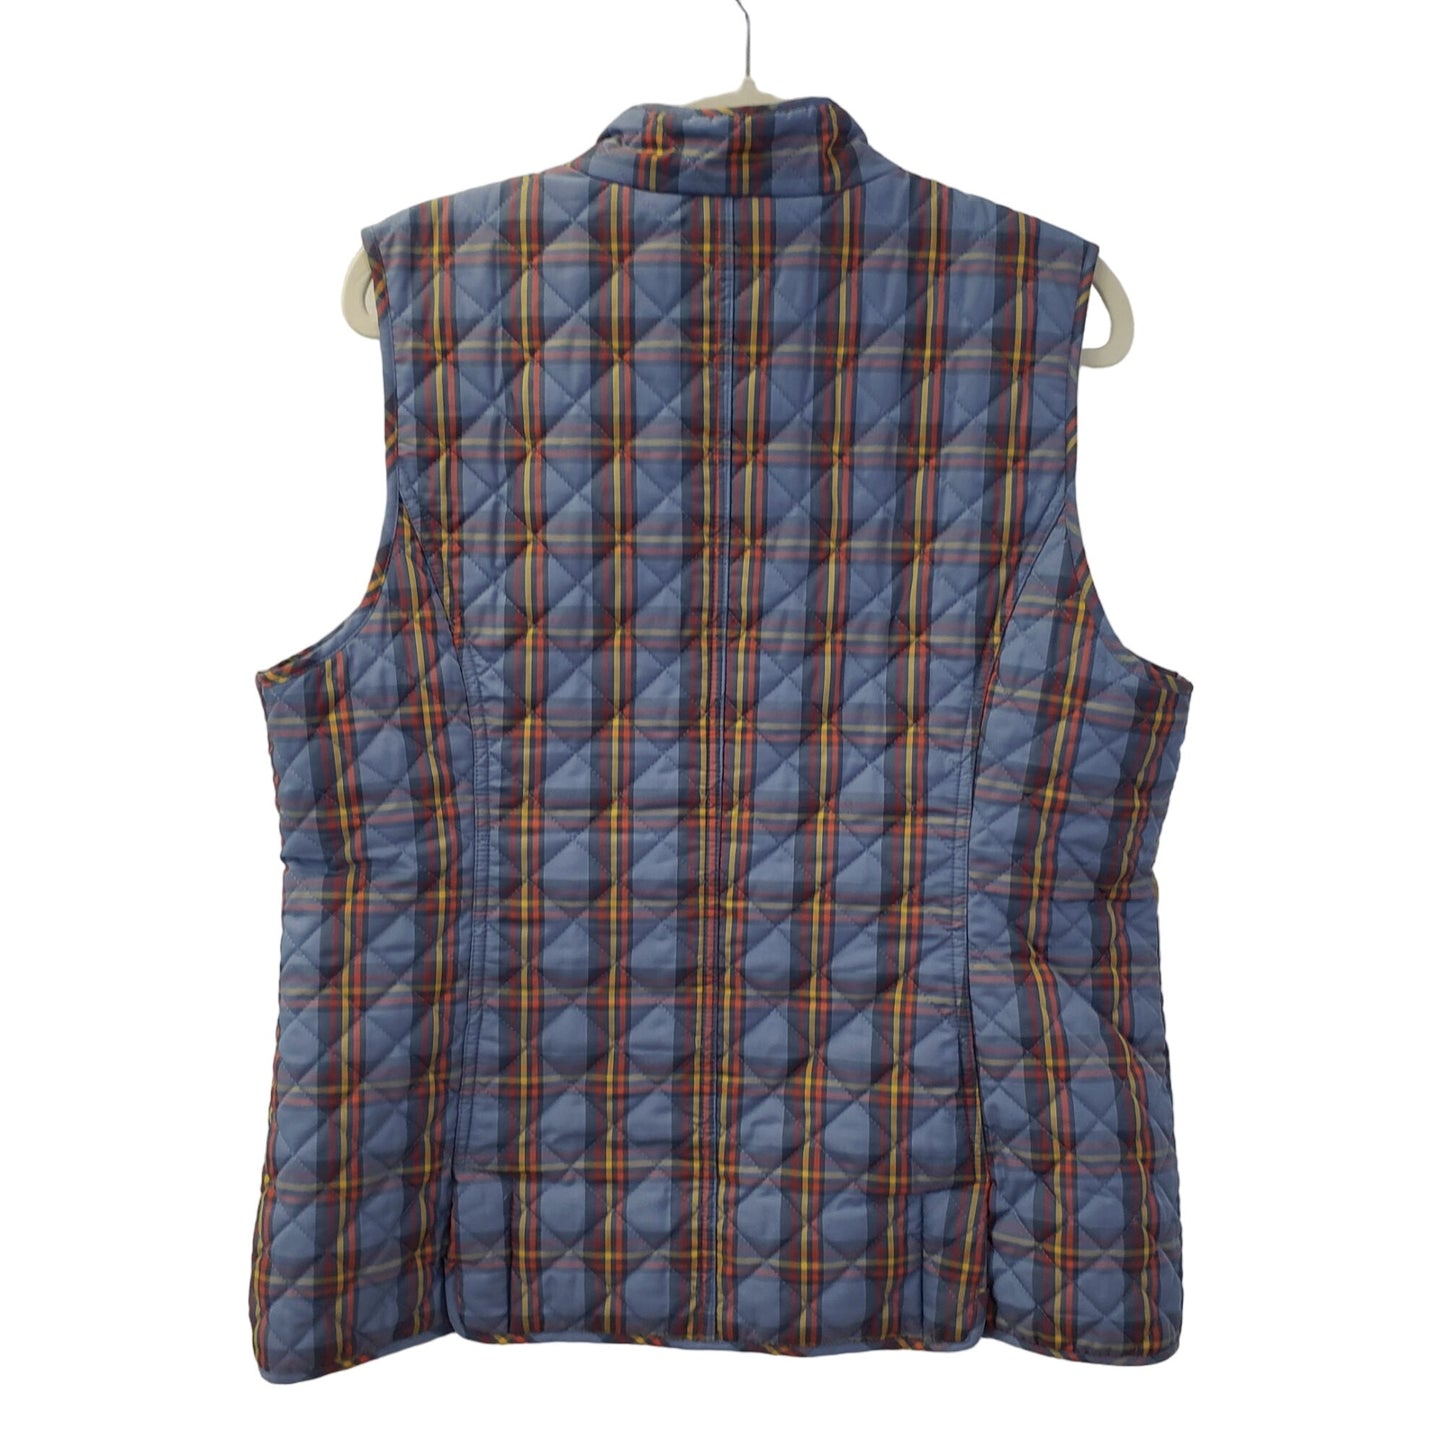 Orvis Plaid Quilted Vest with Thinsulate Size Large (est)